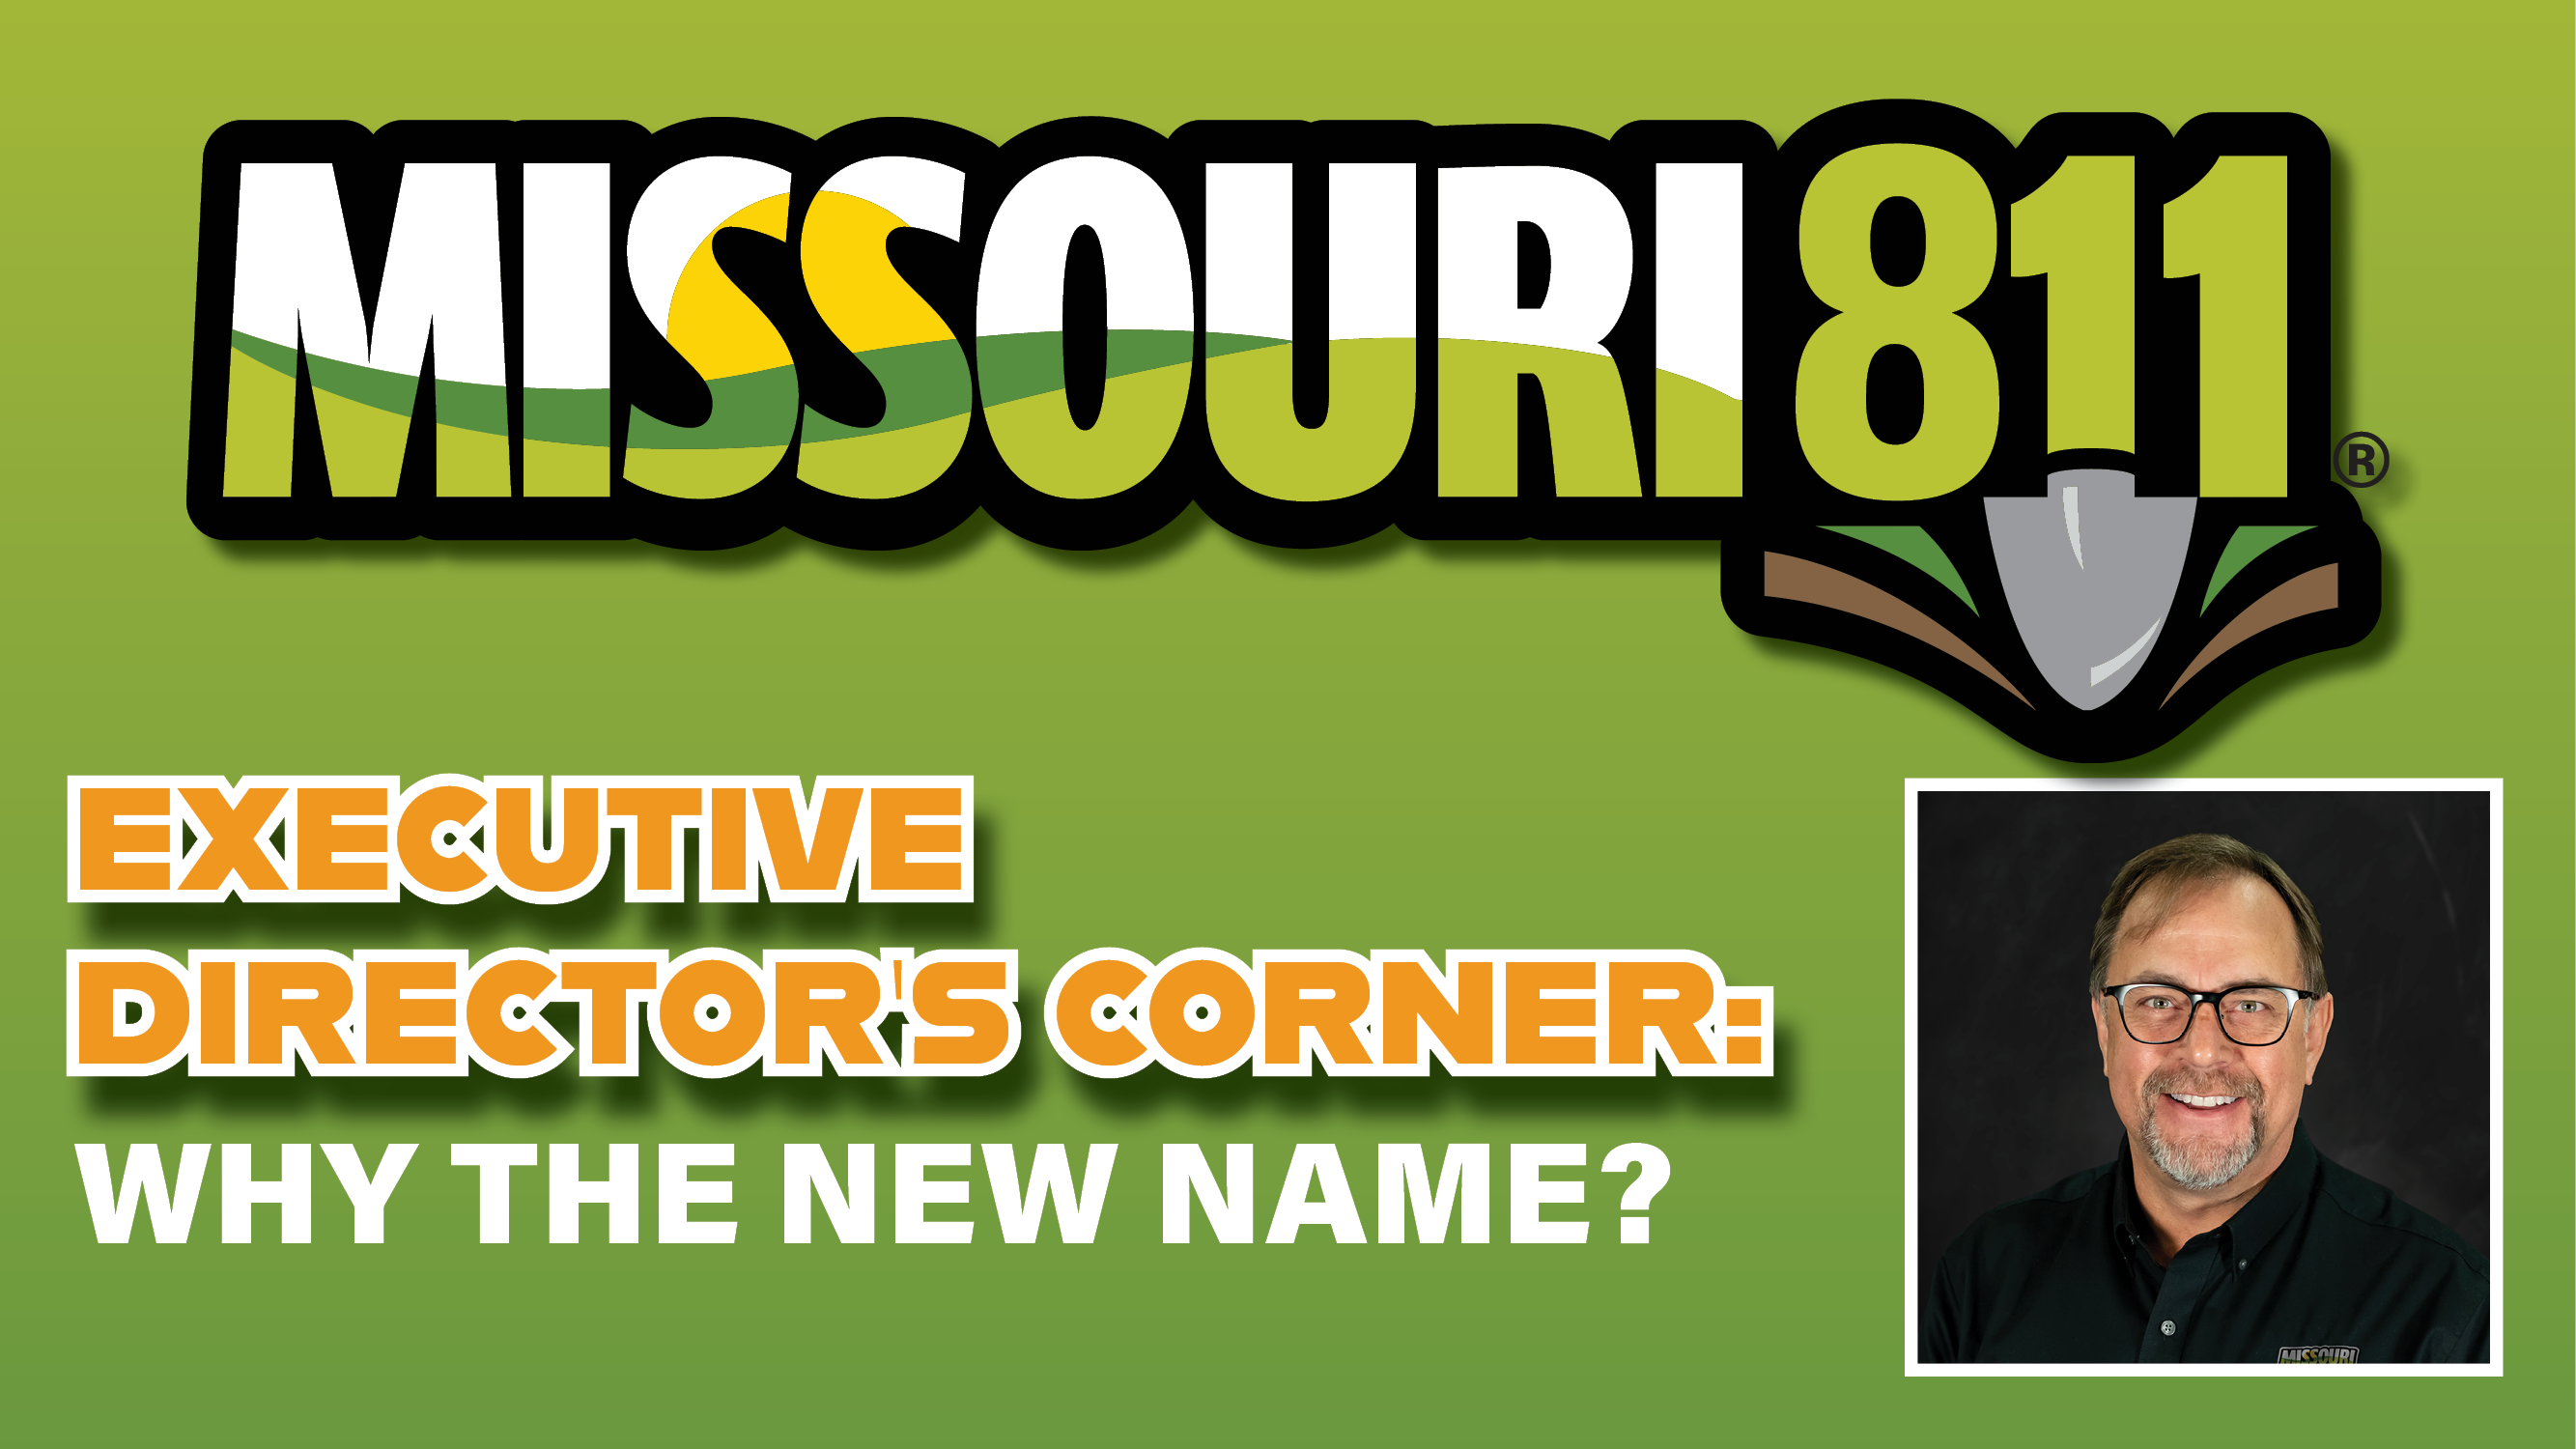 Executive Director's Corner: Why the new name?